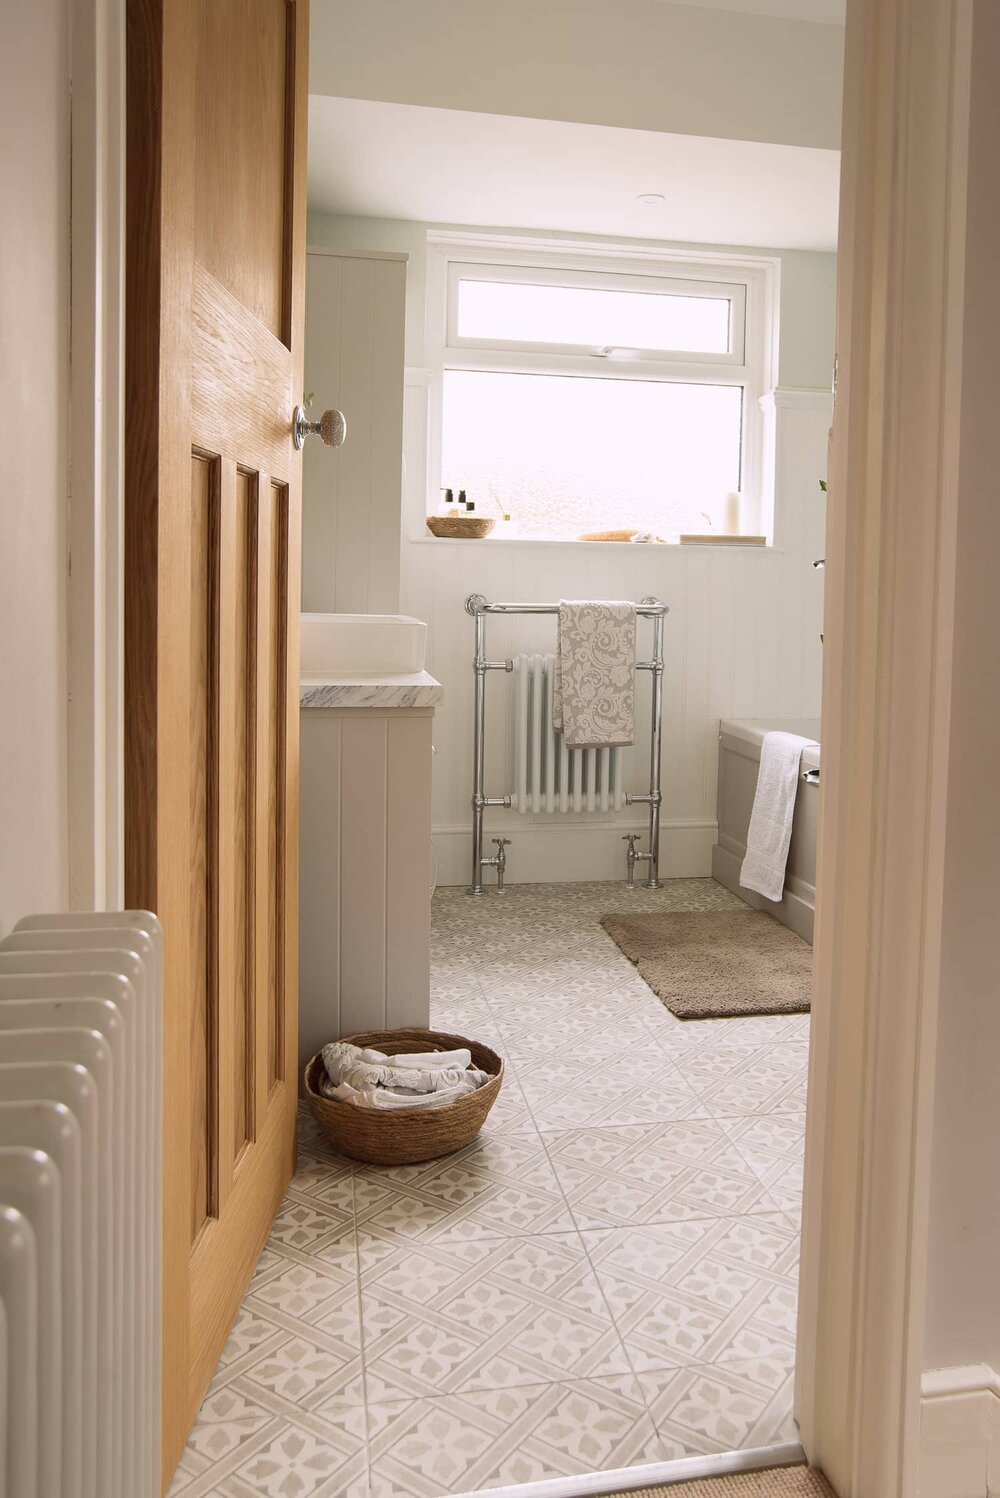 A Bathroom Renovation Cost, How Much To Renovate A Small Bathroom Uk